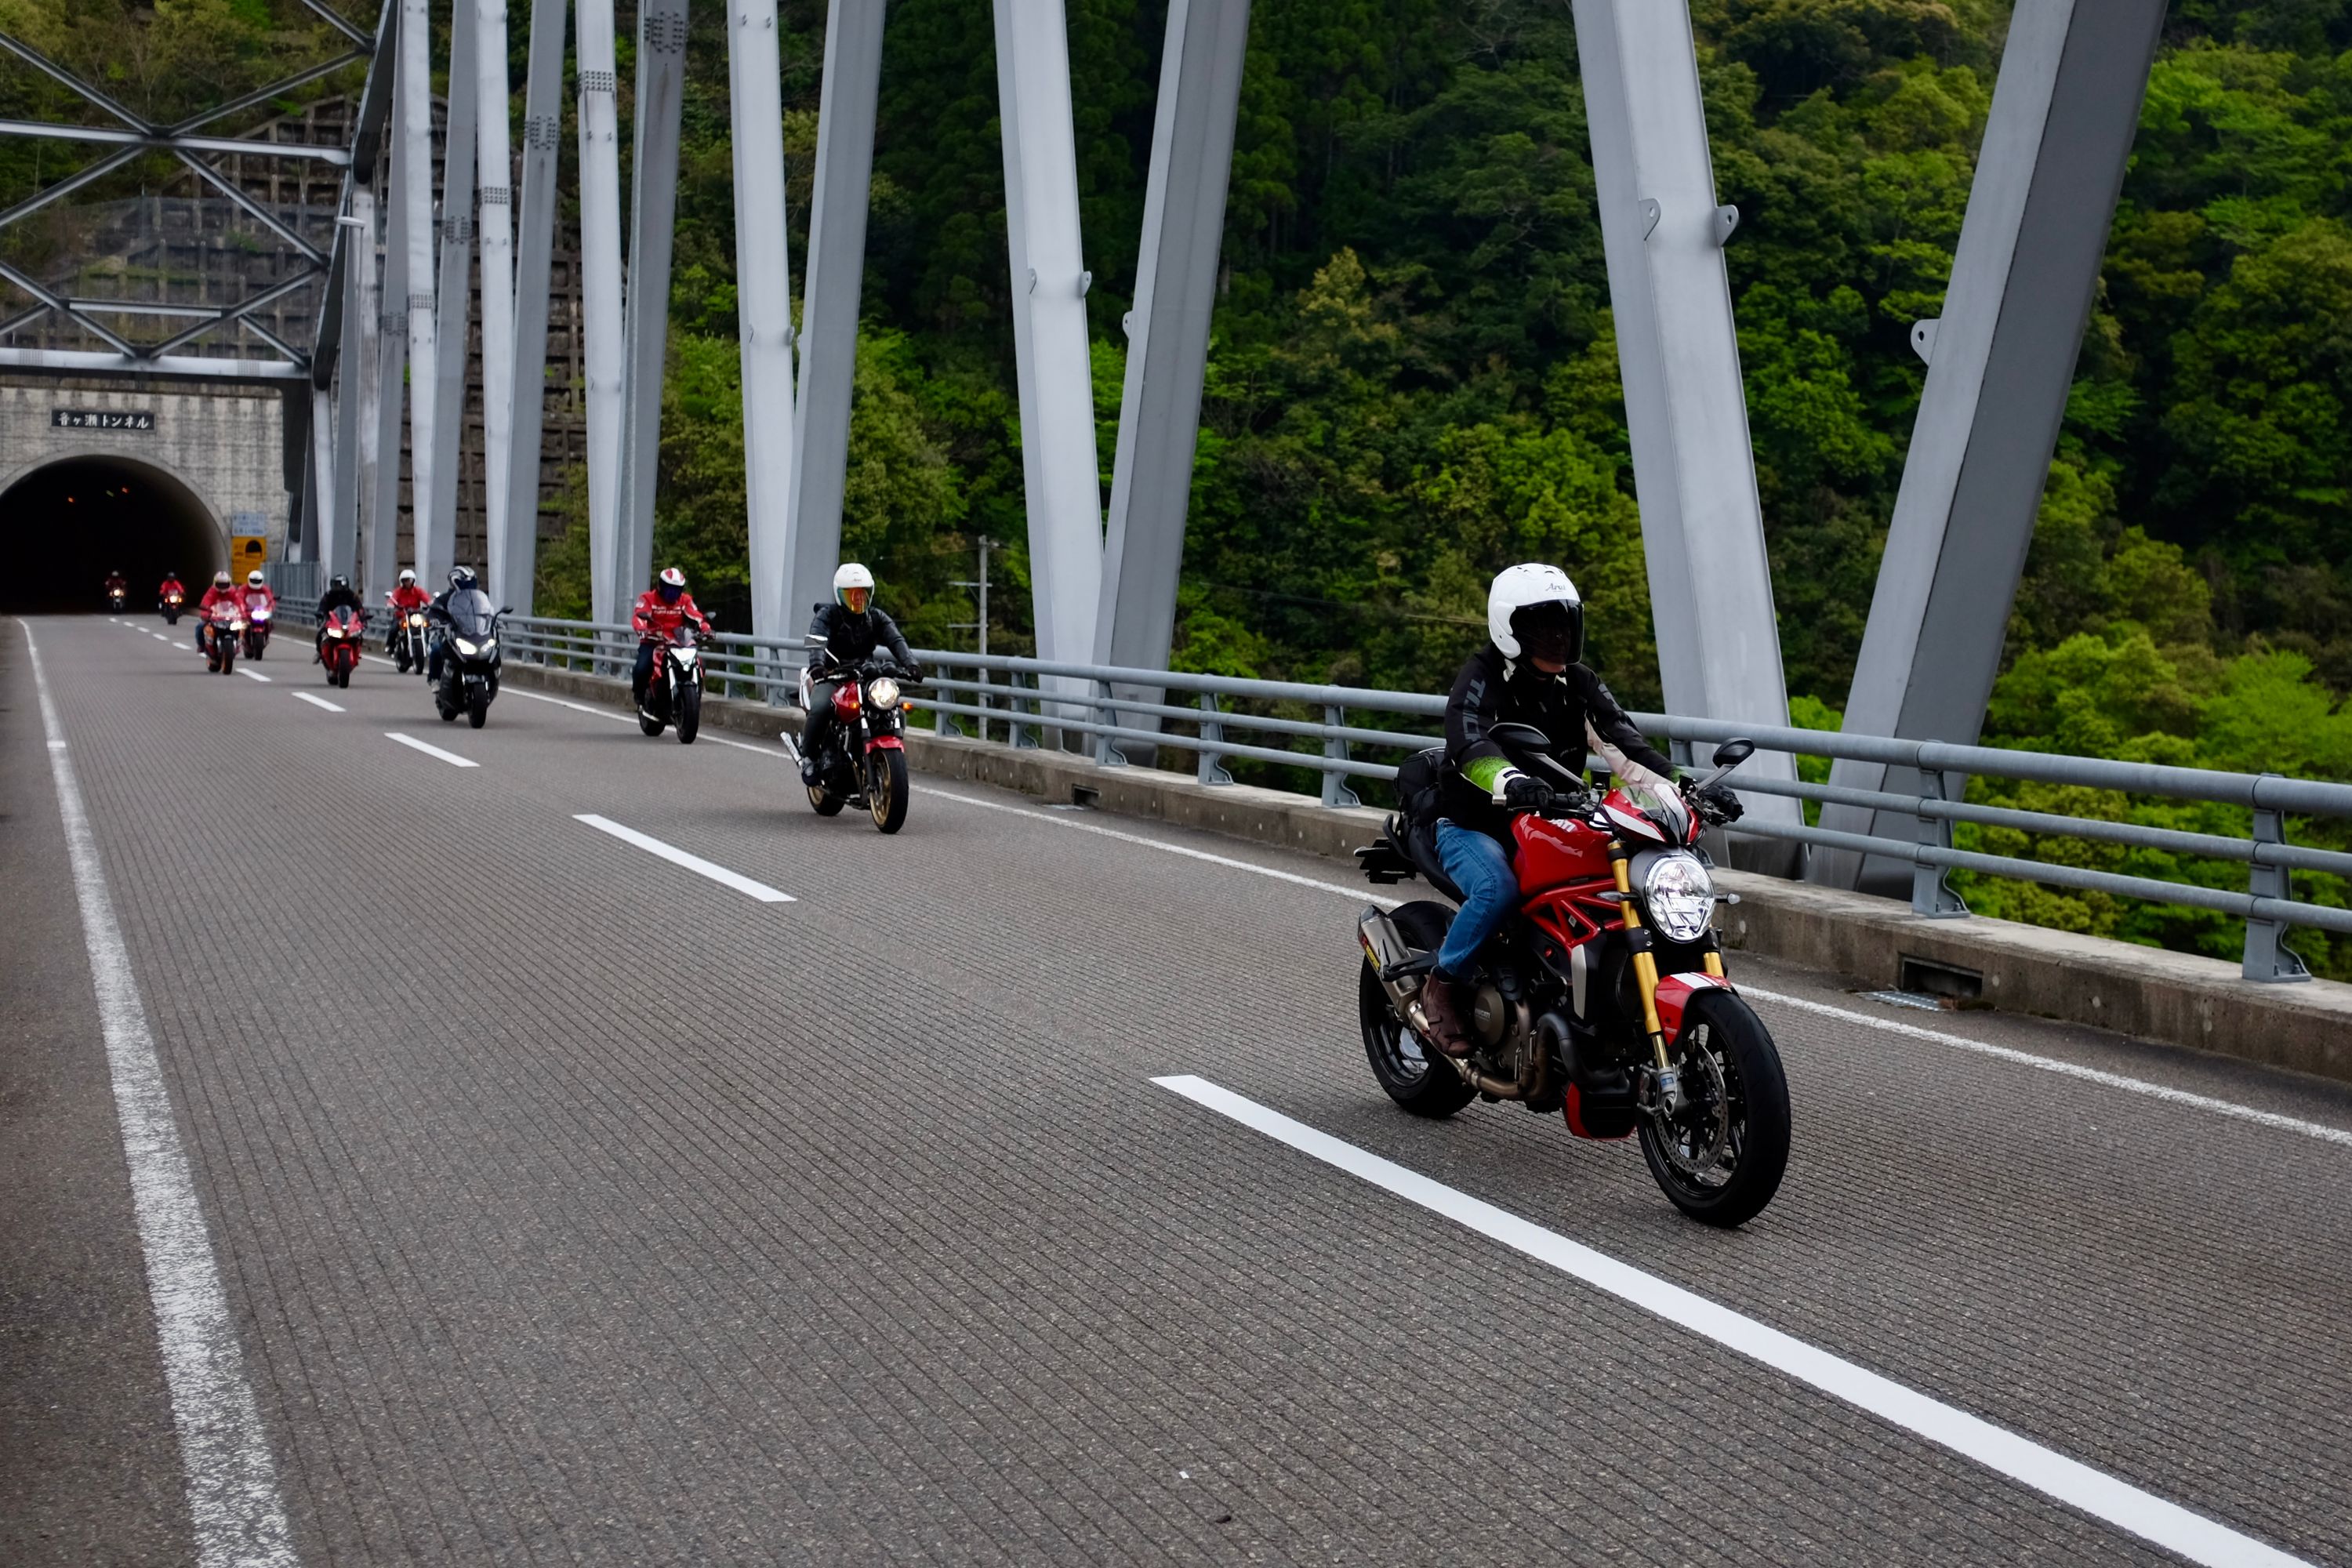 Motorcycles cross a bridge in the mountains.